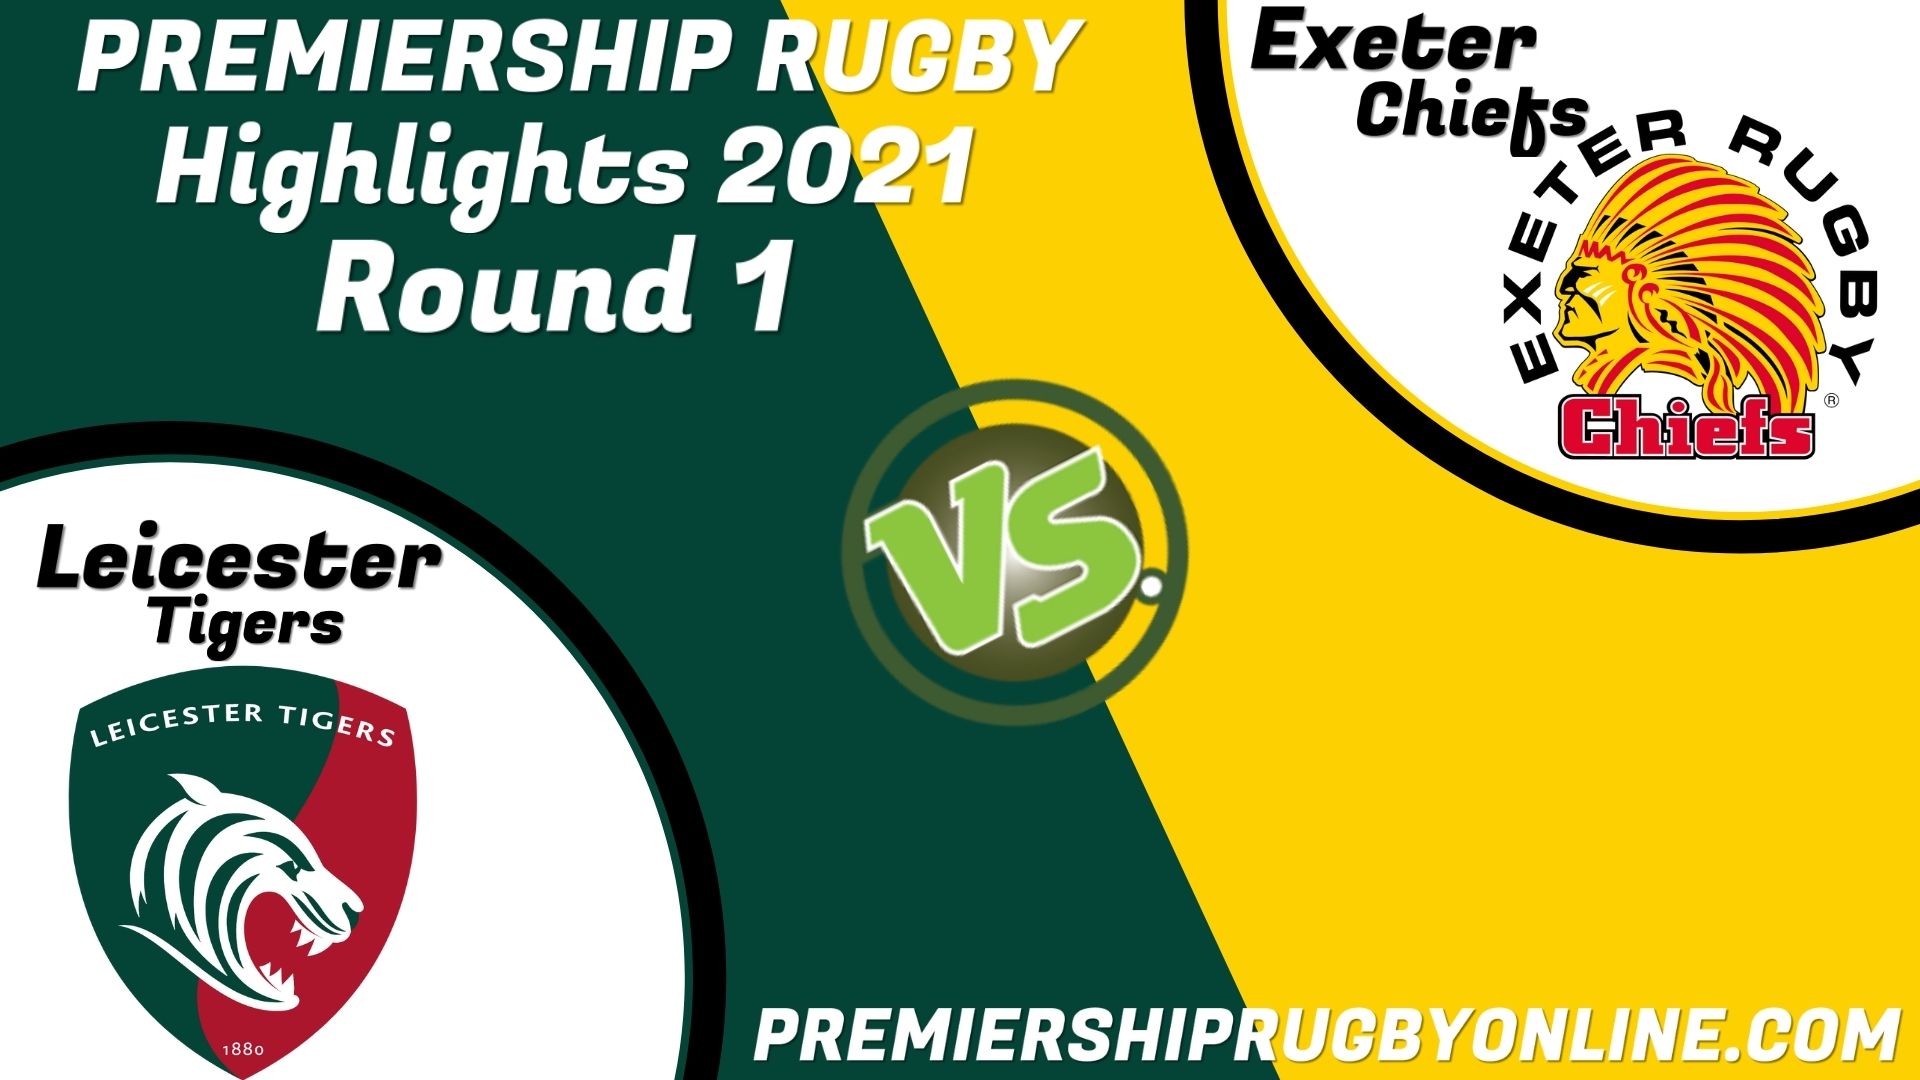 Leicester Tigers Vs Exeter Chiefs Highlights 2021 RD 1